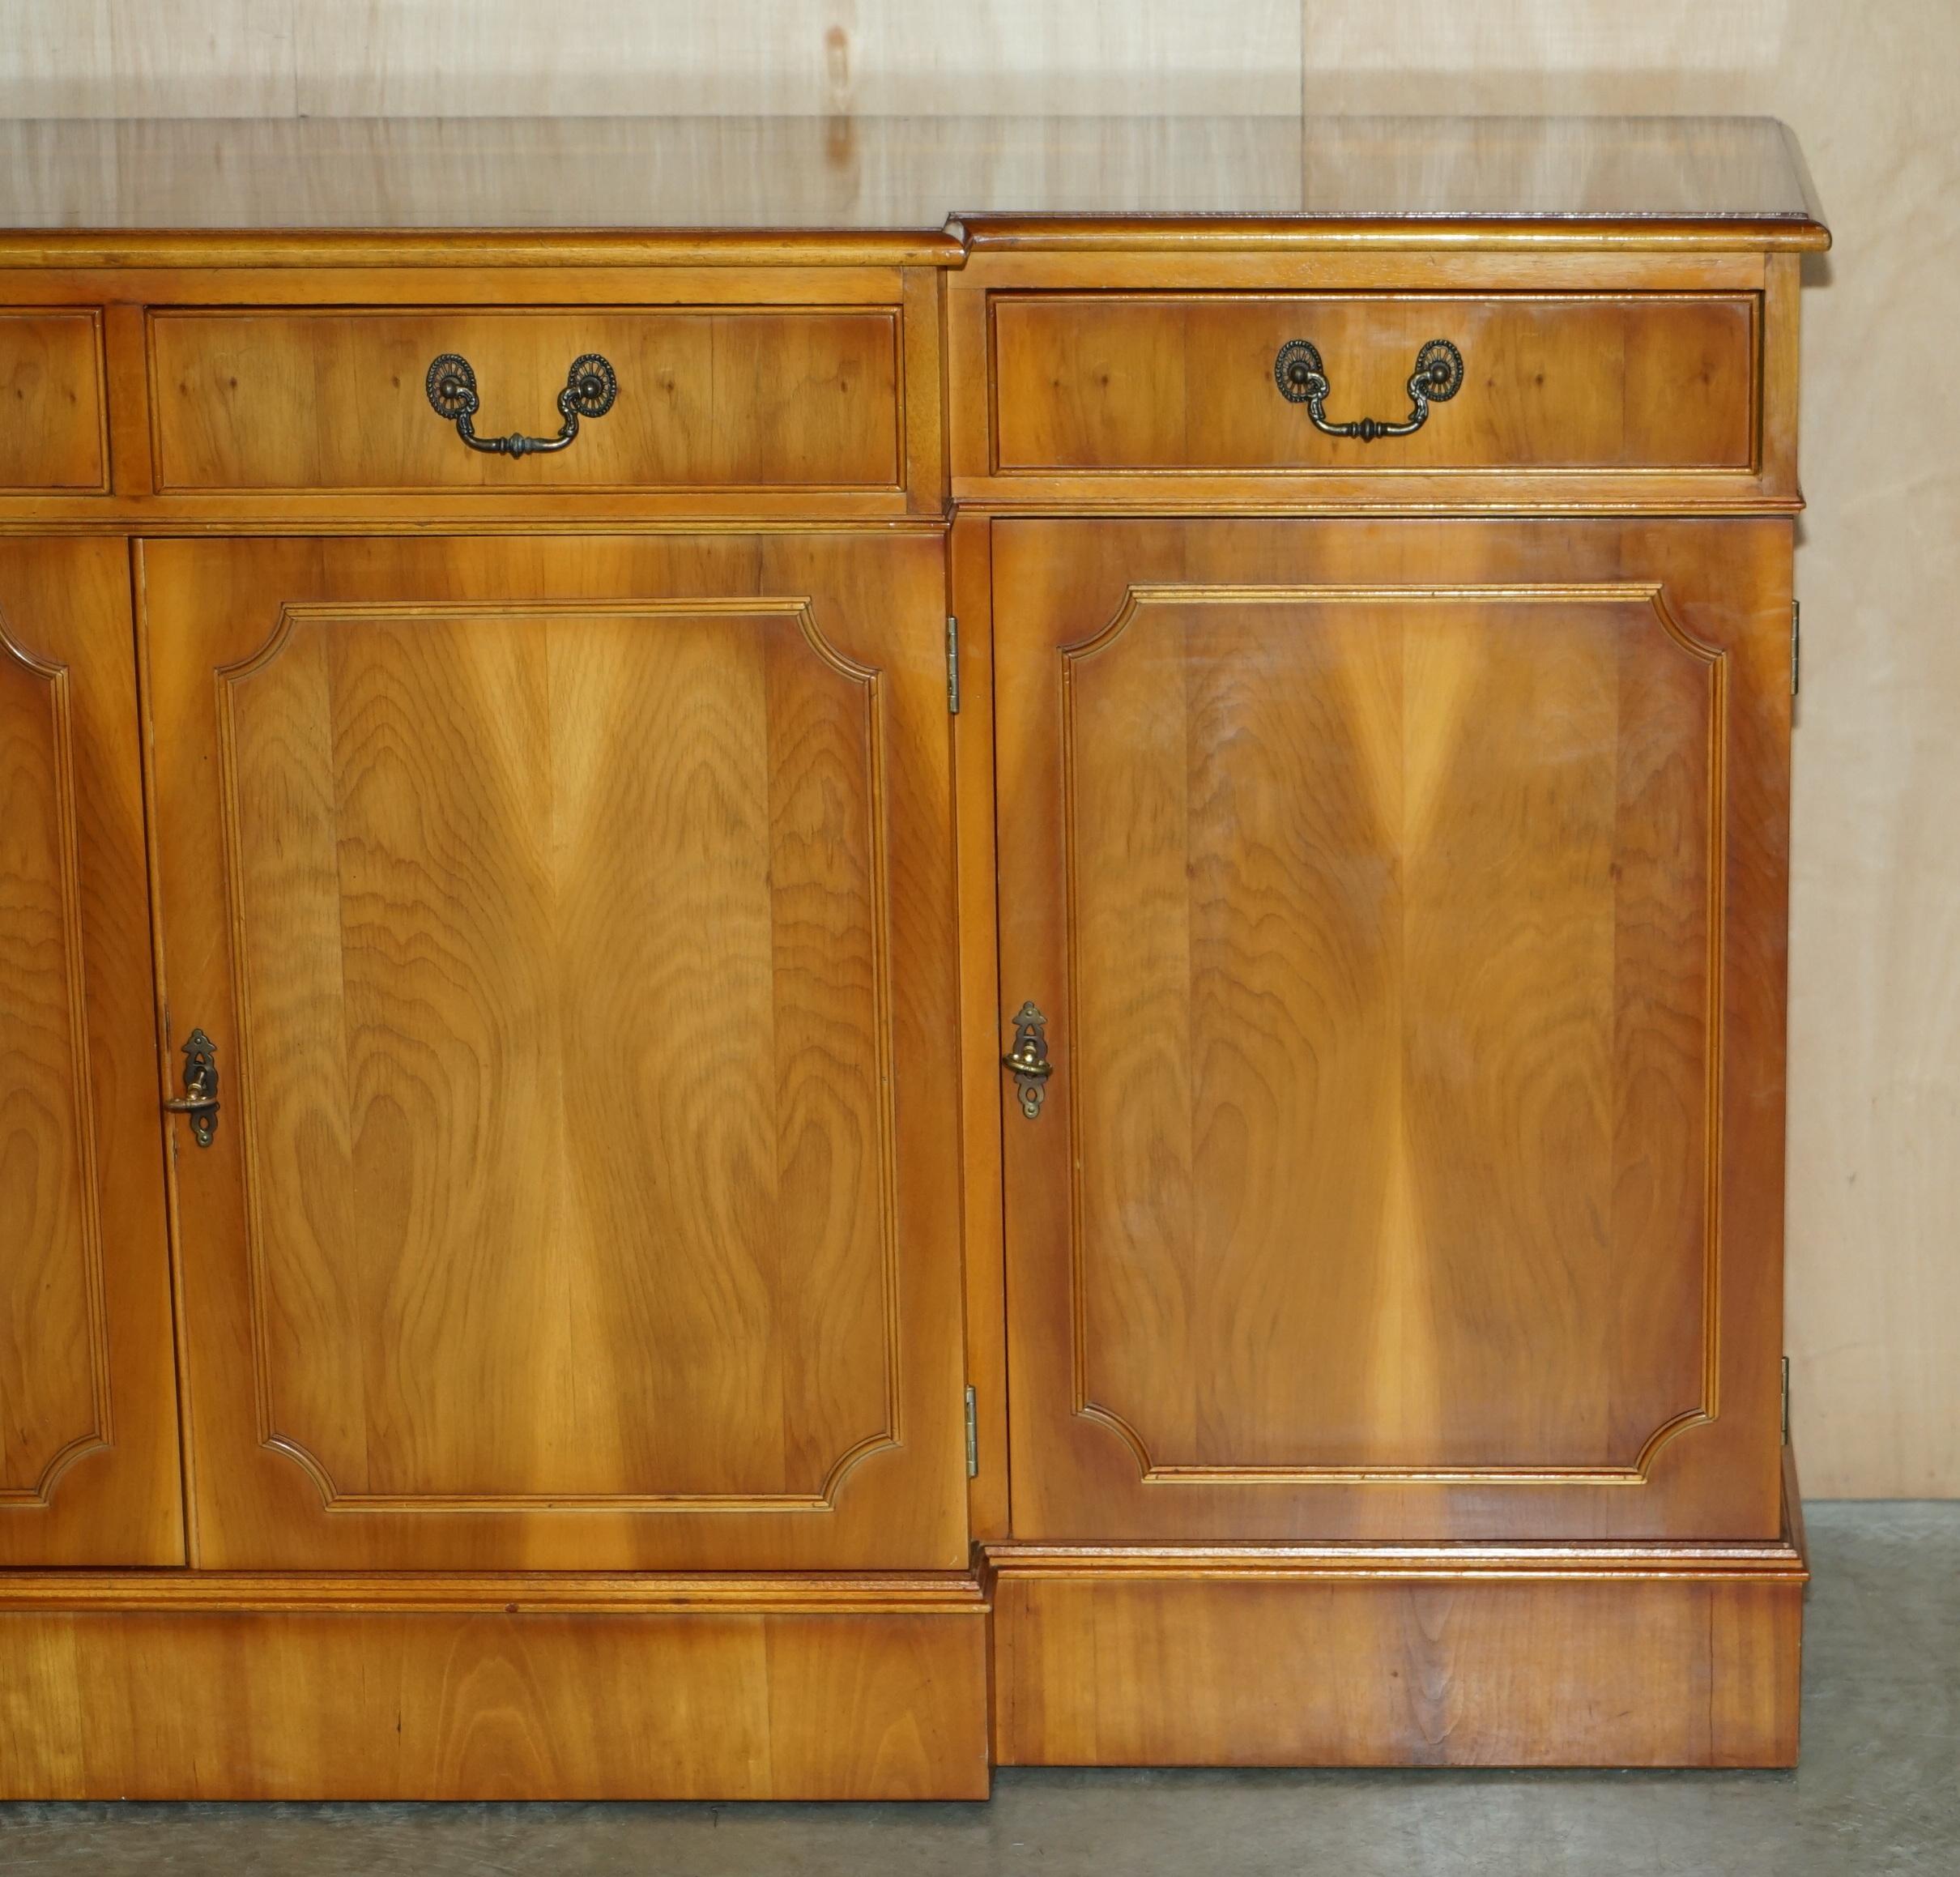 English Vintage Burr Yew Wood Breakfront Sideboard with Four Drawers & Original Key For Sale